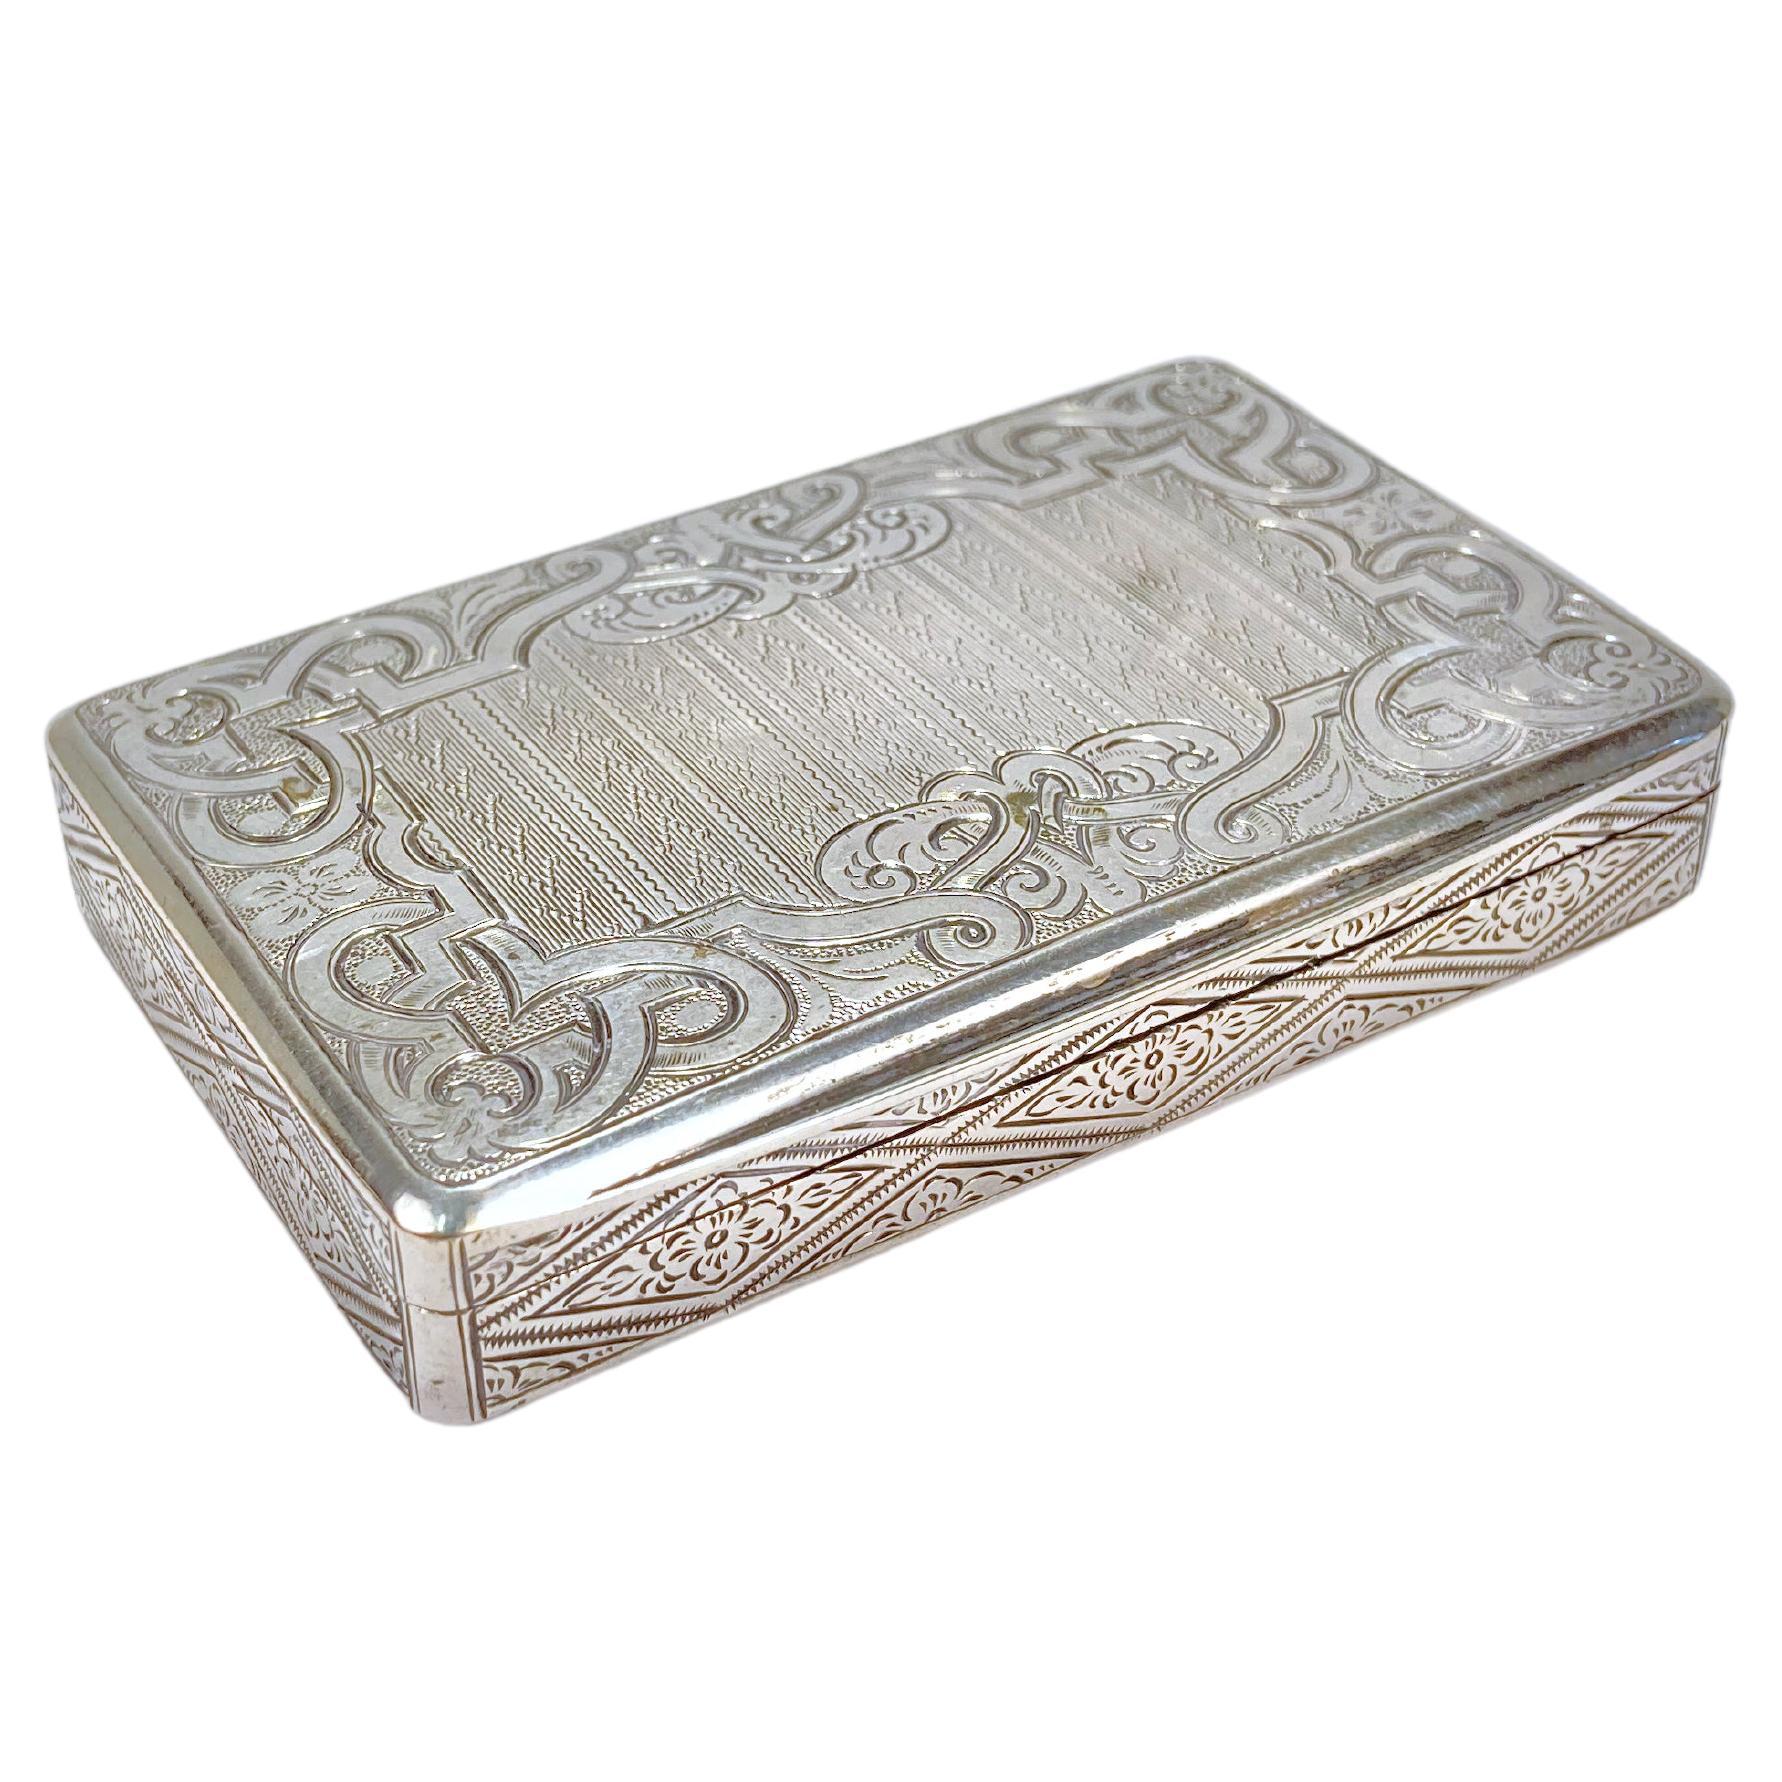 Antique Viennese or Austrian Engine-Turned Silver Card Case or Snuff Box For Sale